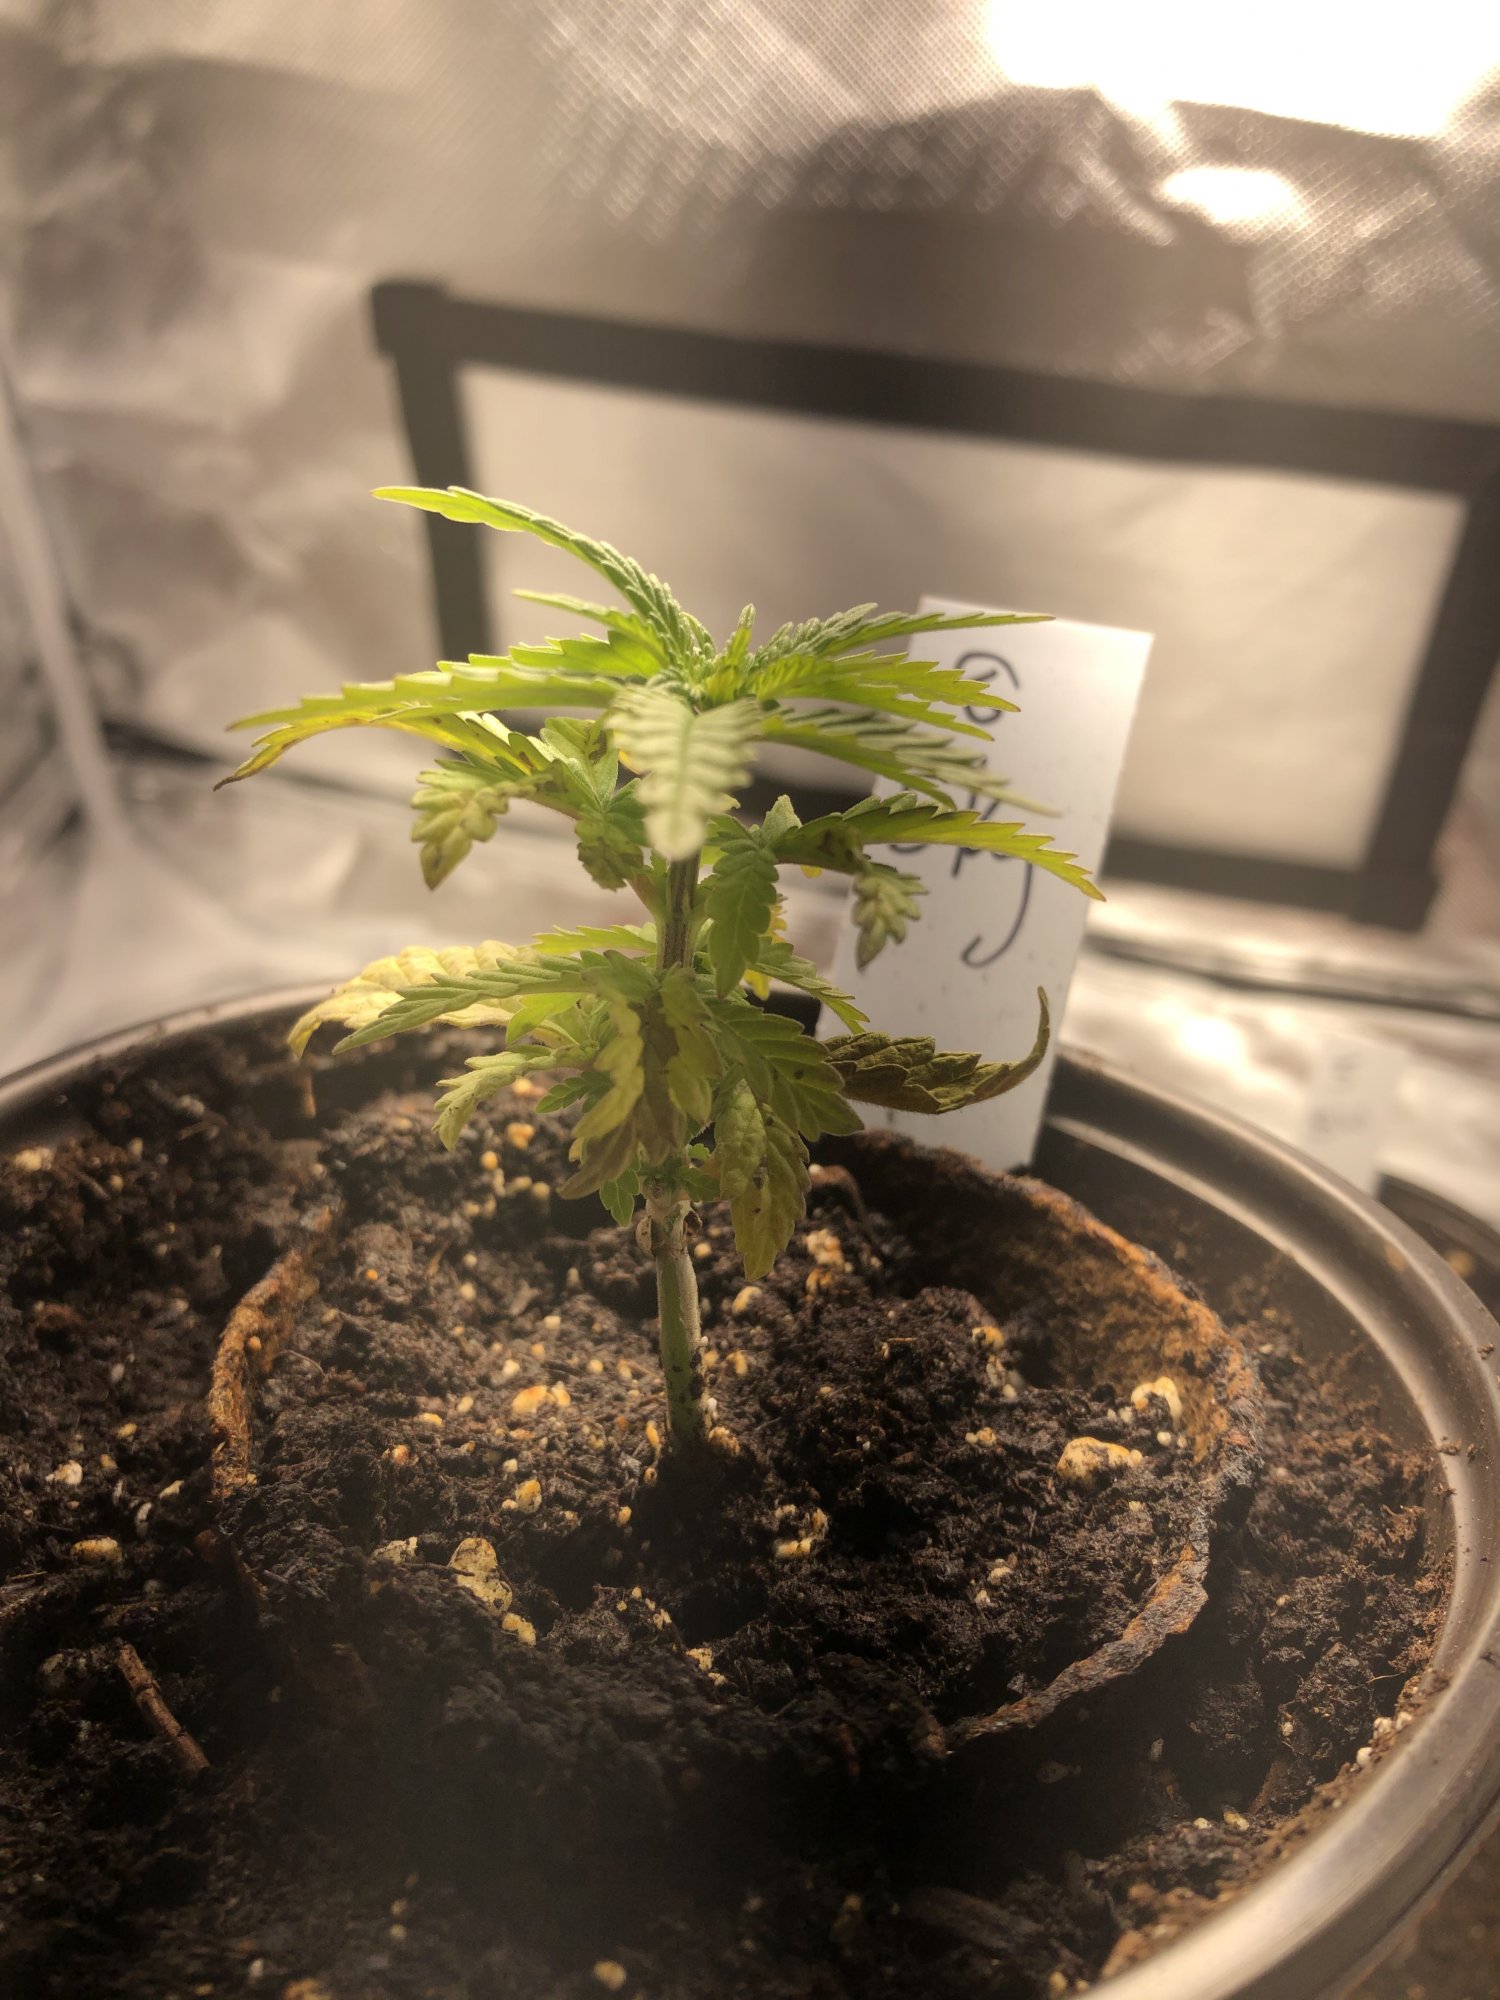 First indoor grow and my plants took terrible why 3